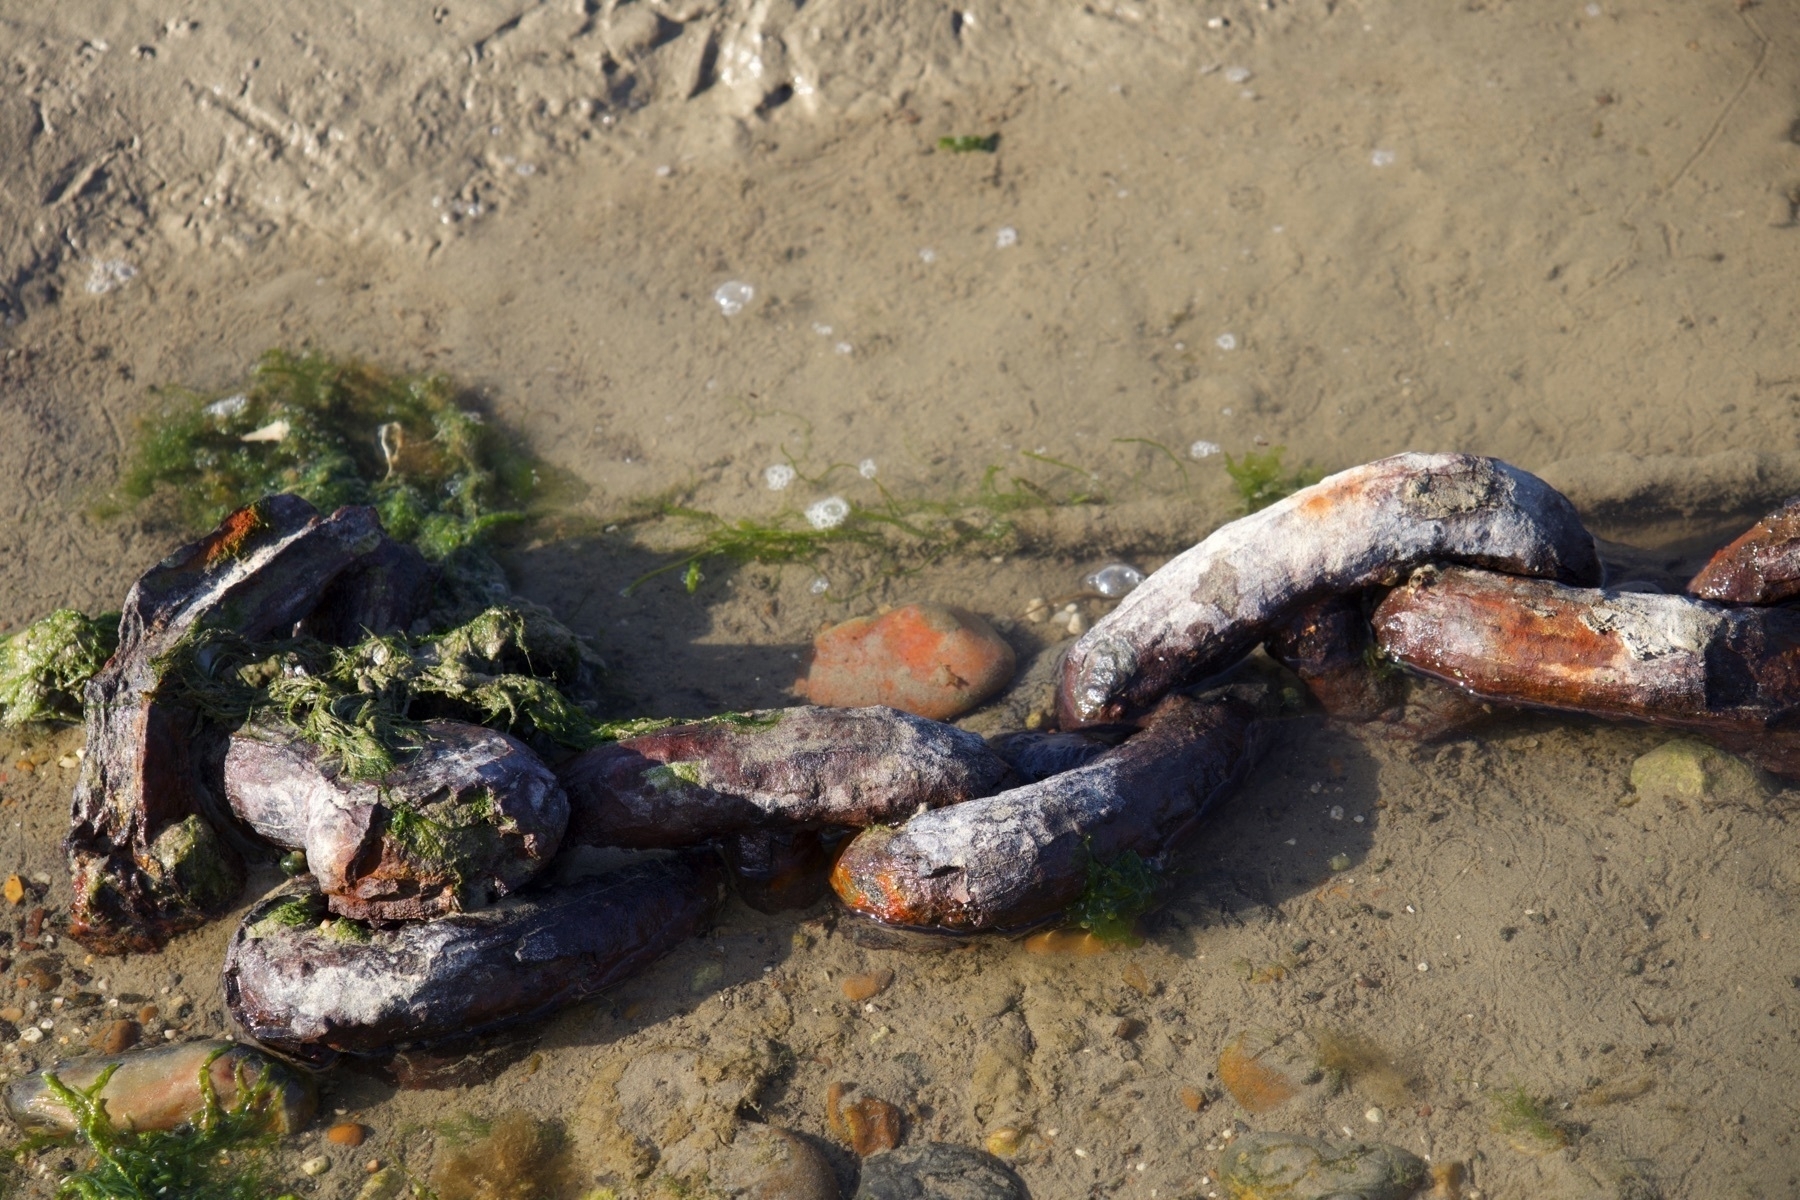 A chain covered in seaweed in the Adur at low tide.